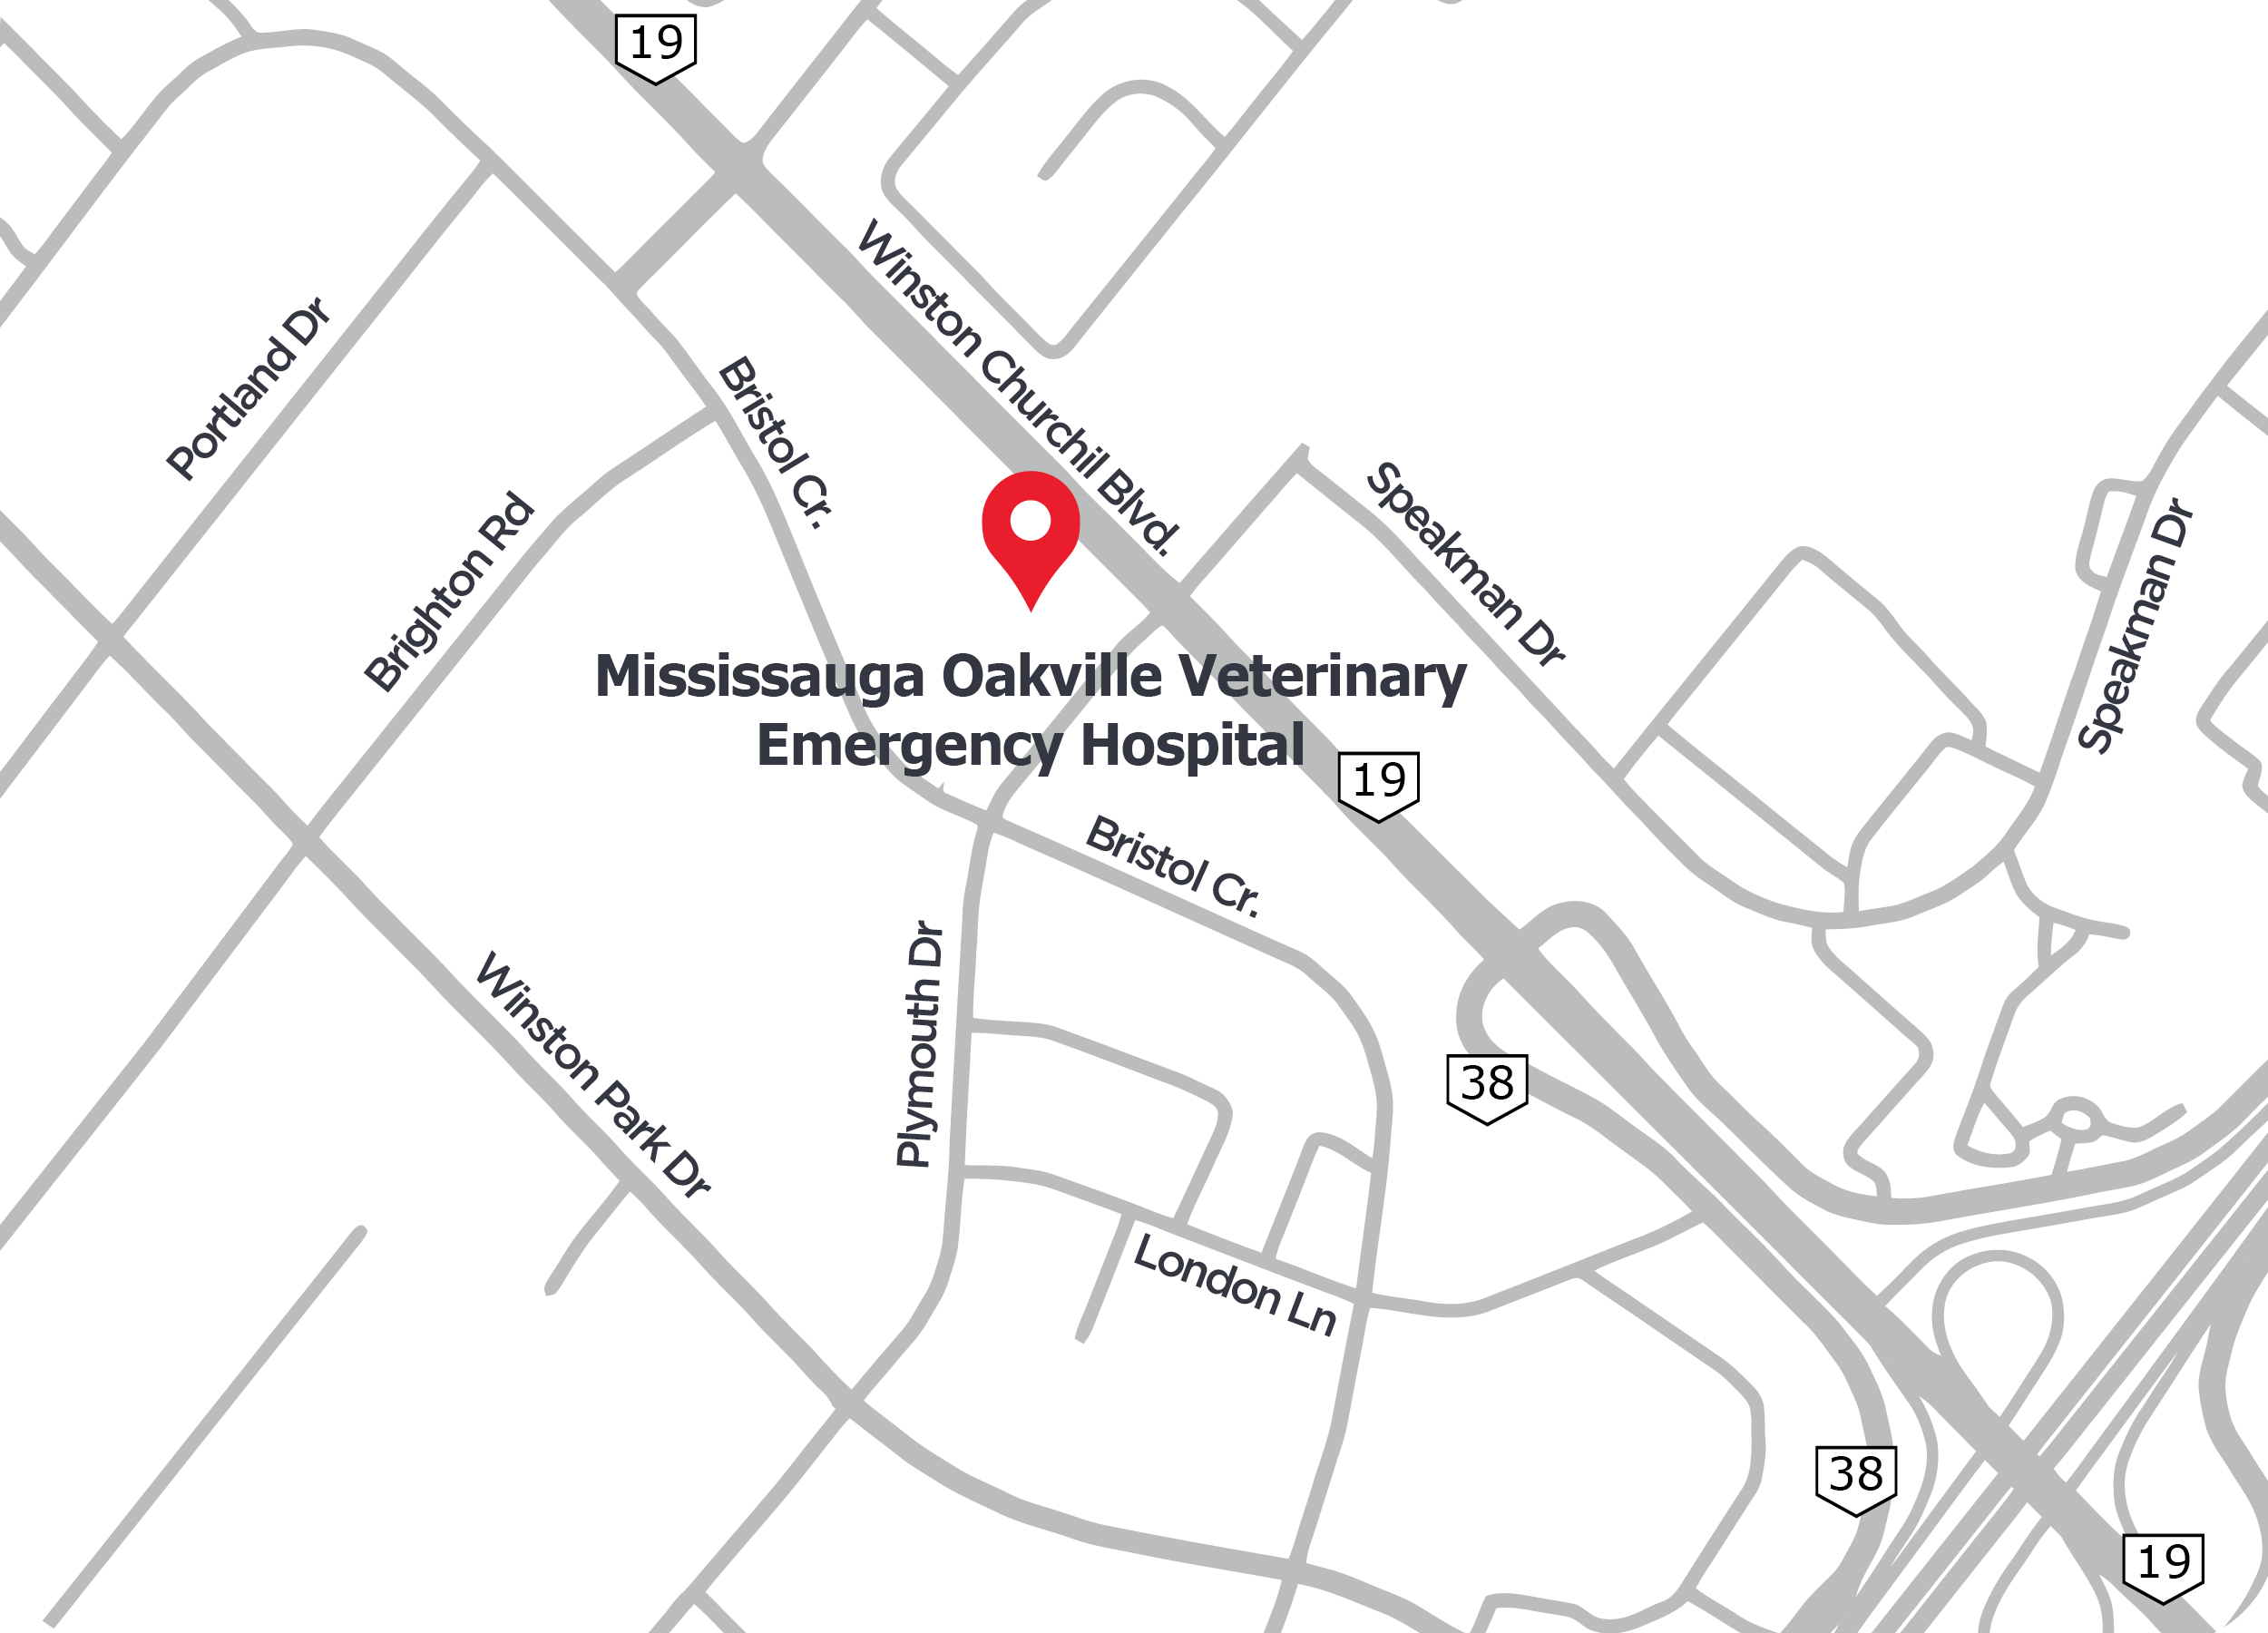 Mississauga Oakville Veterinary Emergency and Specialty Hospital